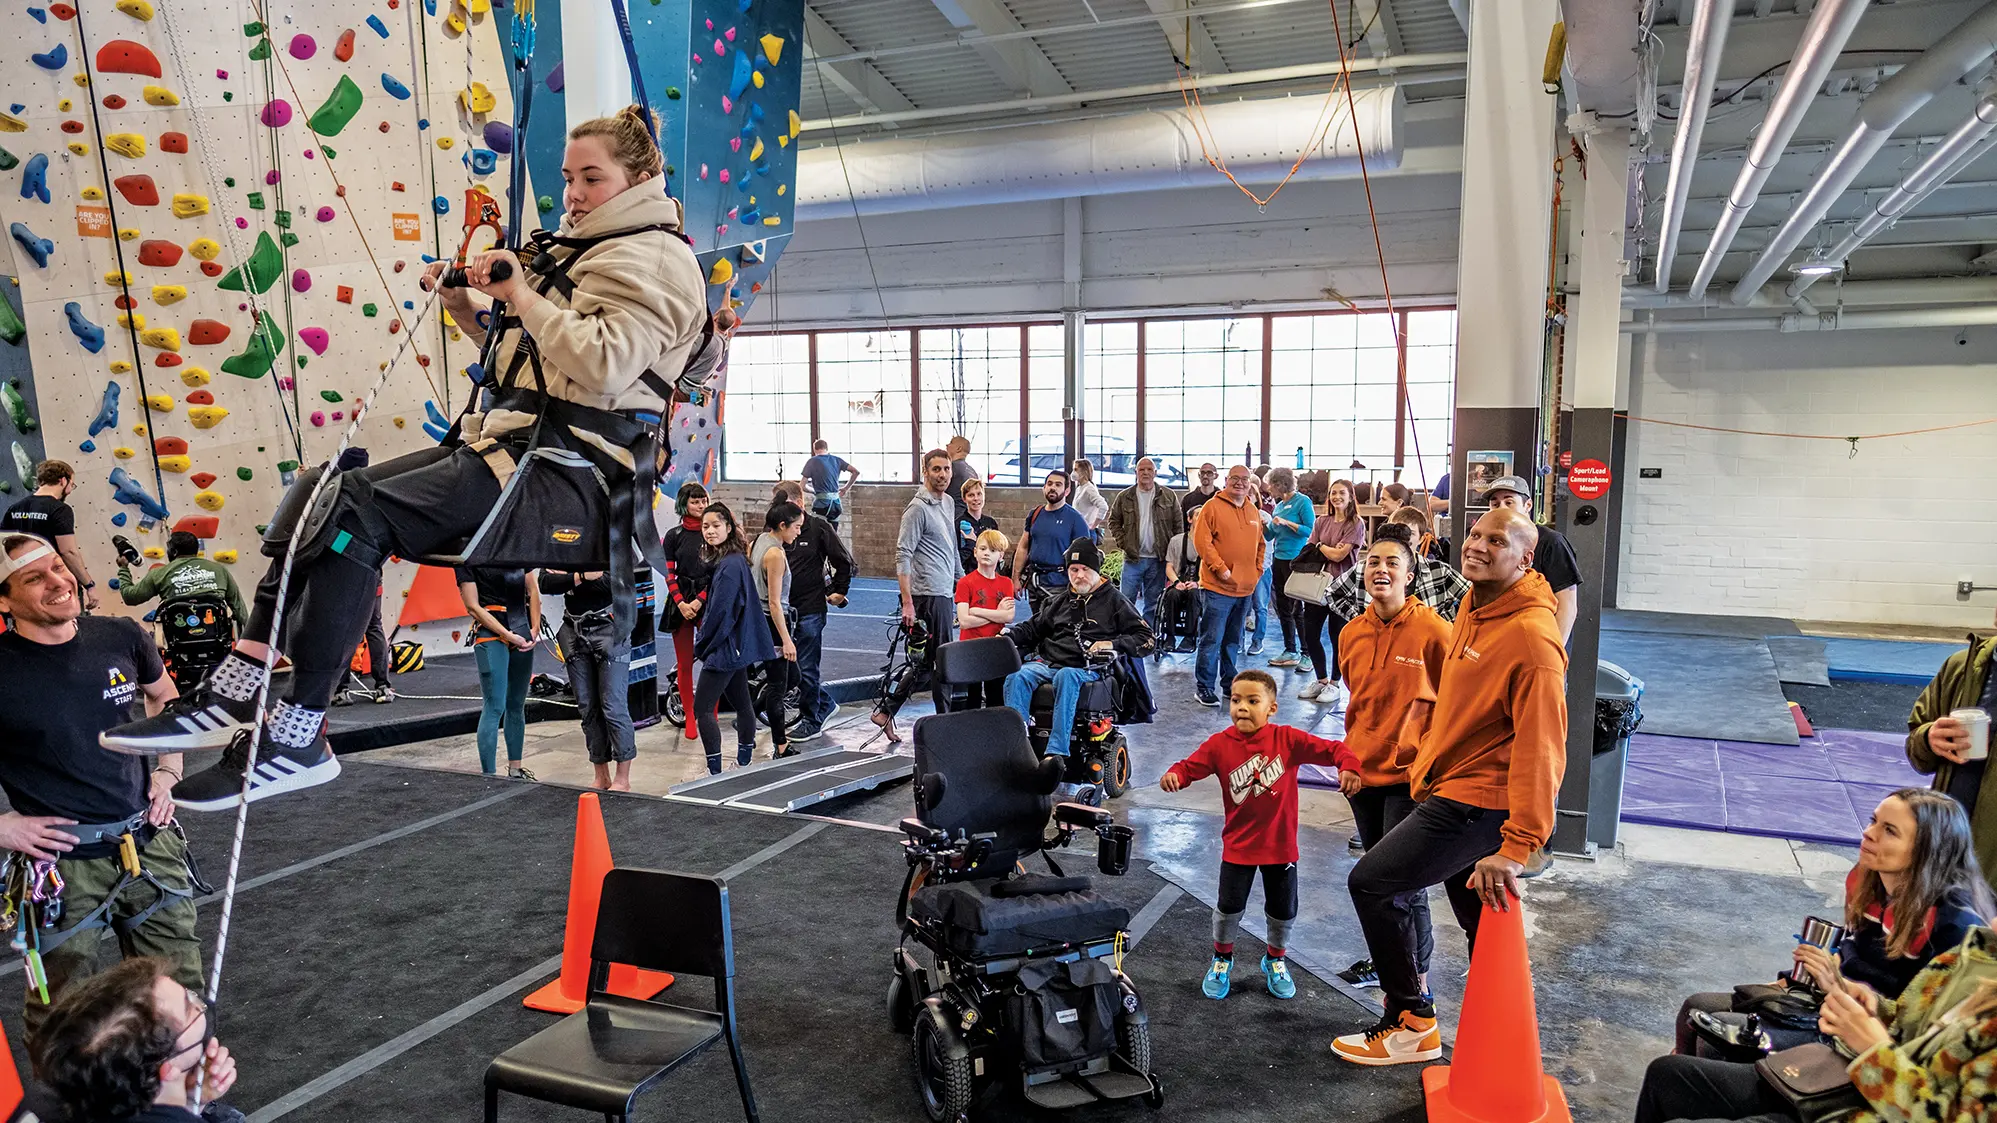 A white woman in a seat hoisted into the air holds a hand bar in front of her as she works to ascend a climbing wall. Lots of people fill the floor of the gym, including three watching her: a mom, dad and young child. The climber’s empty wheelchair sits in from of the family.